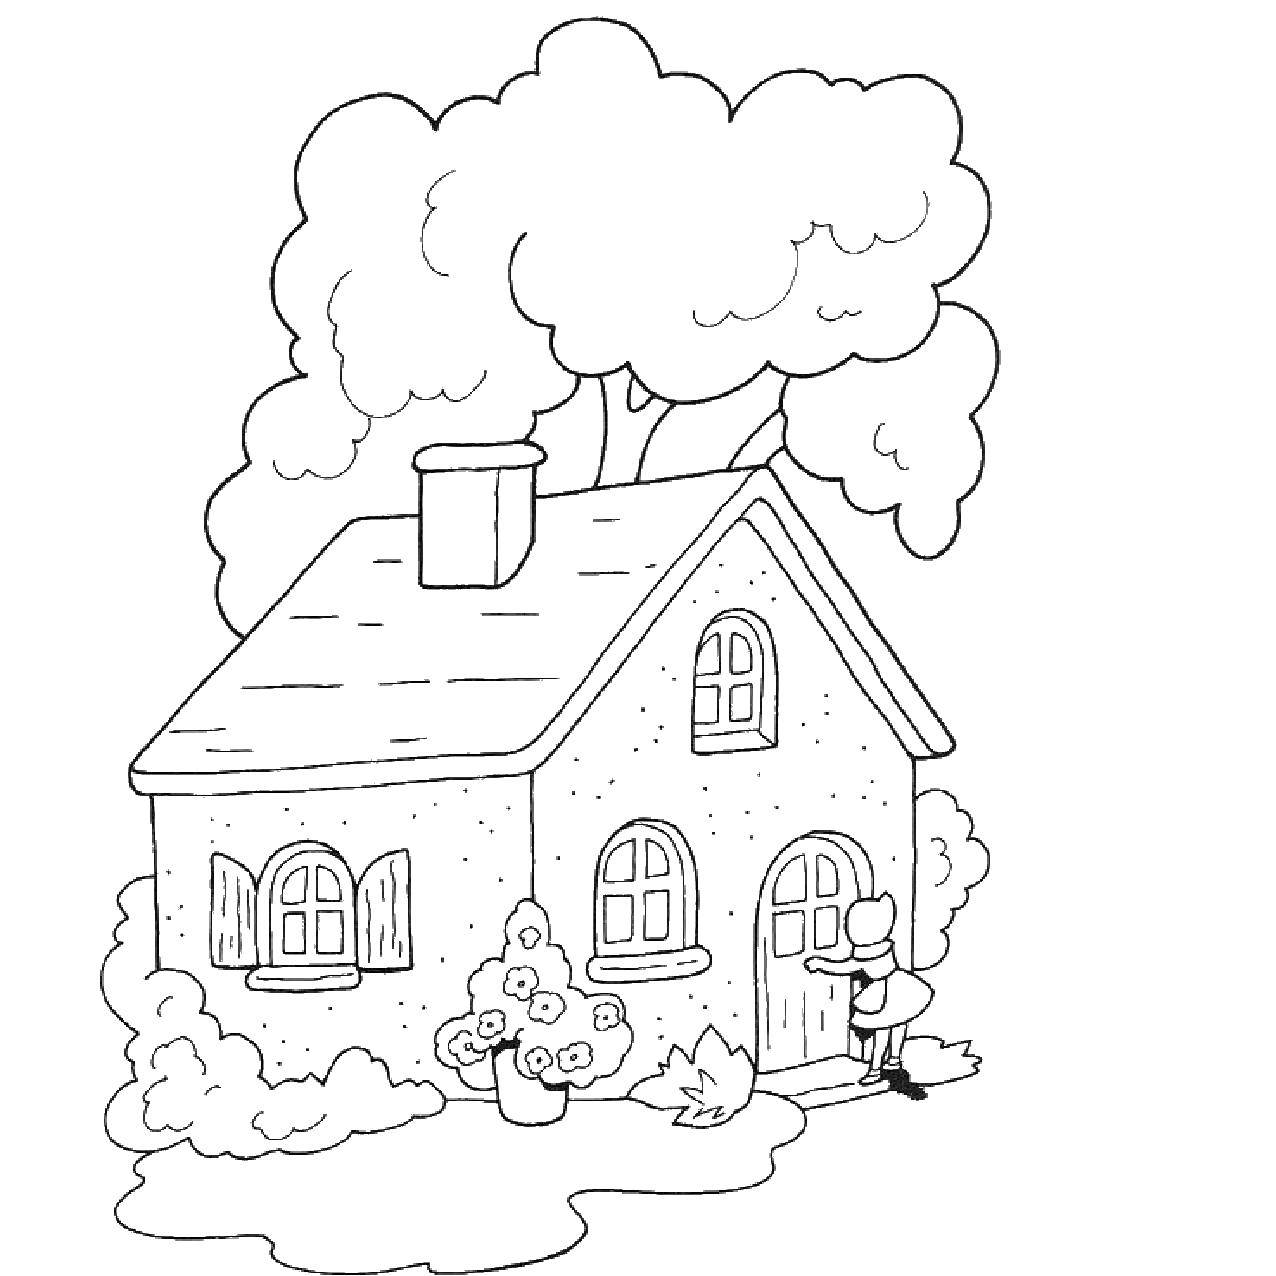 Coloring House. Category the village. Tags:  countryside, house, nature.